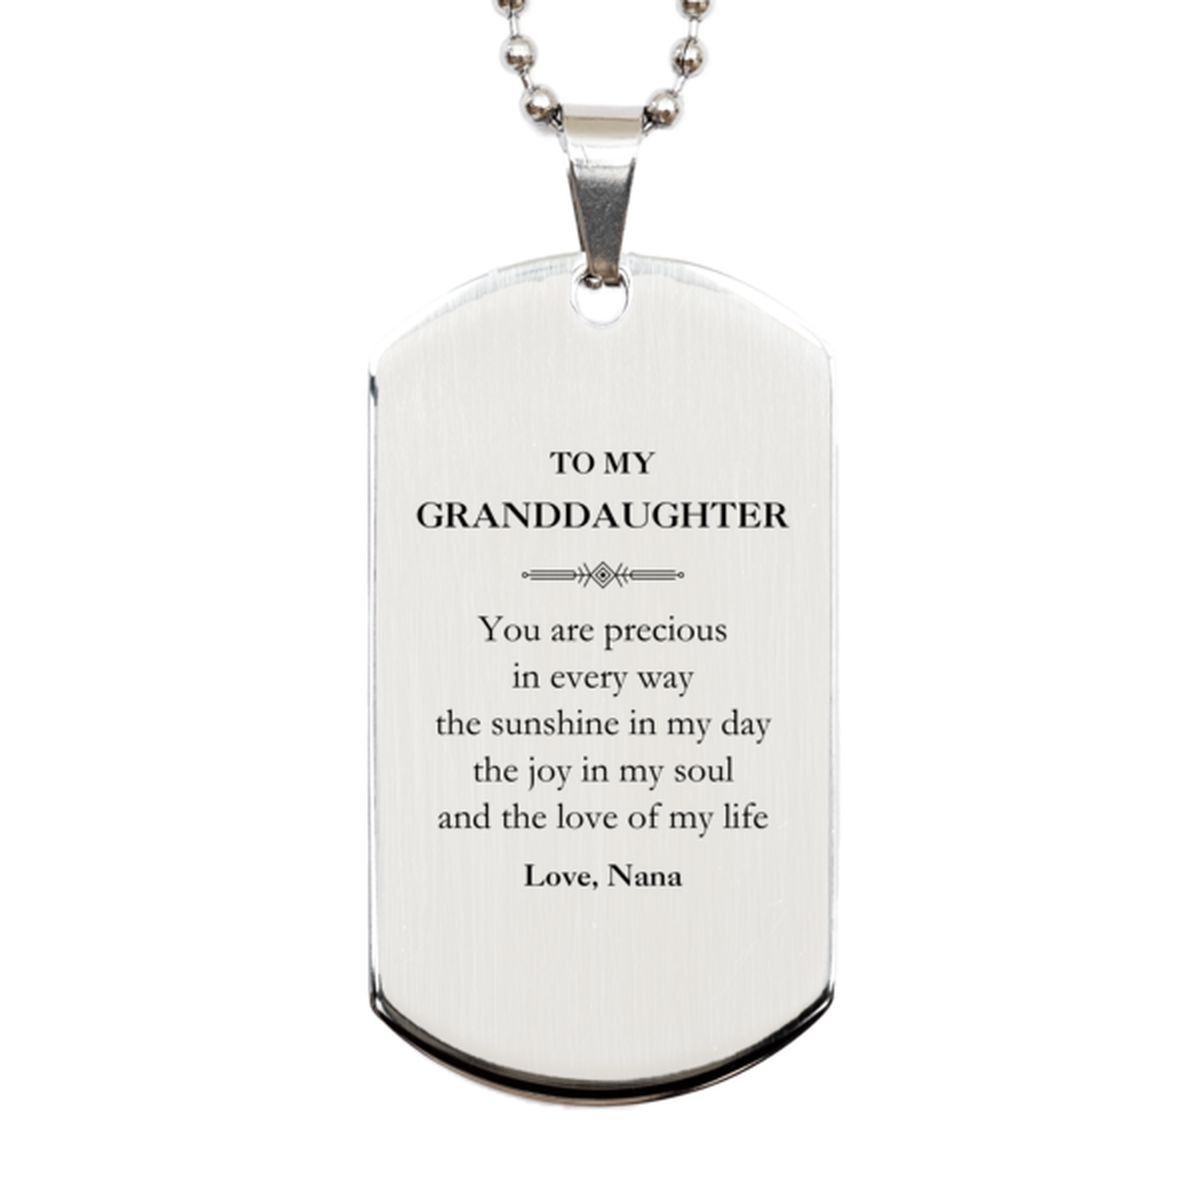 Graduation Gifts for Granddaughter Silver Dog Tag Present from Nana, Christmas Granddaughter Birthday Gifts Granddaughter You are precious in every way the sunshine in my day. Love, Nana